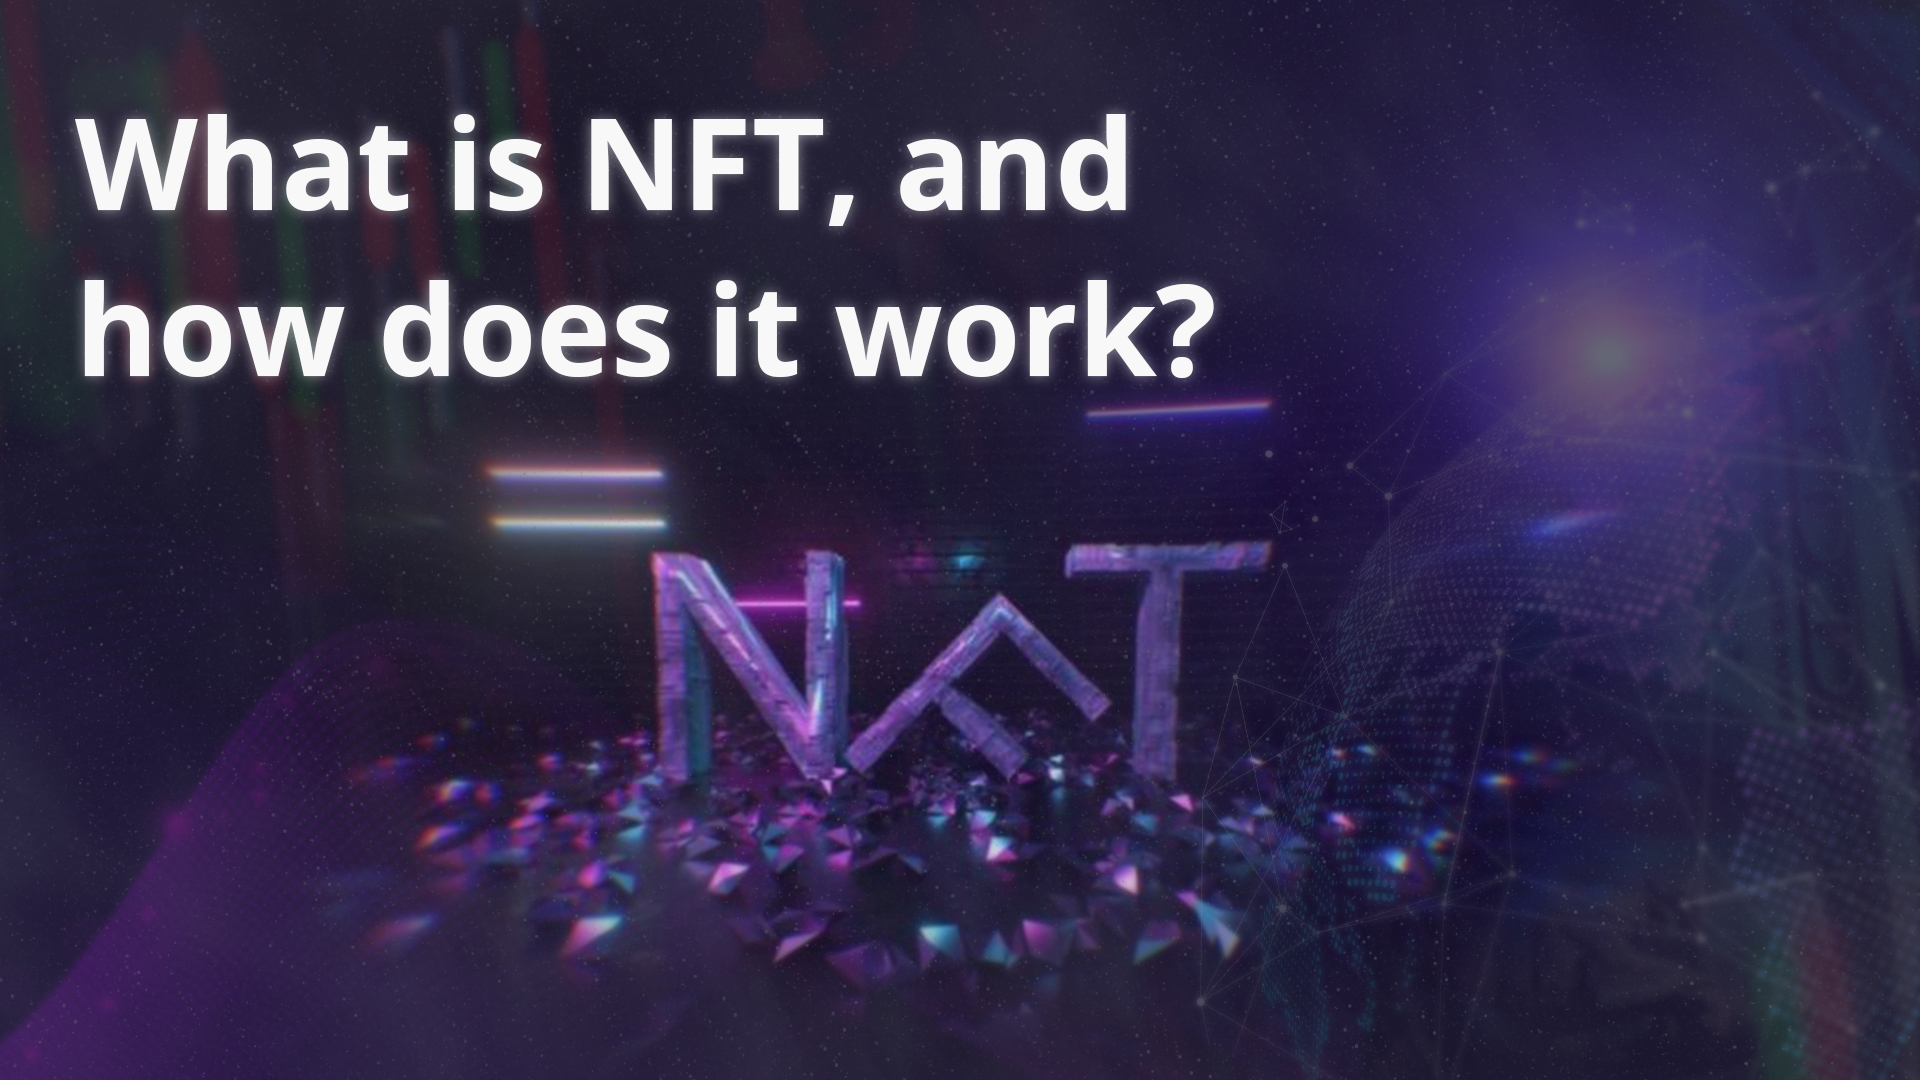 What is NFT, and how does it work?